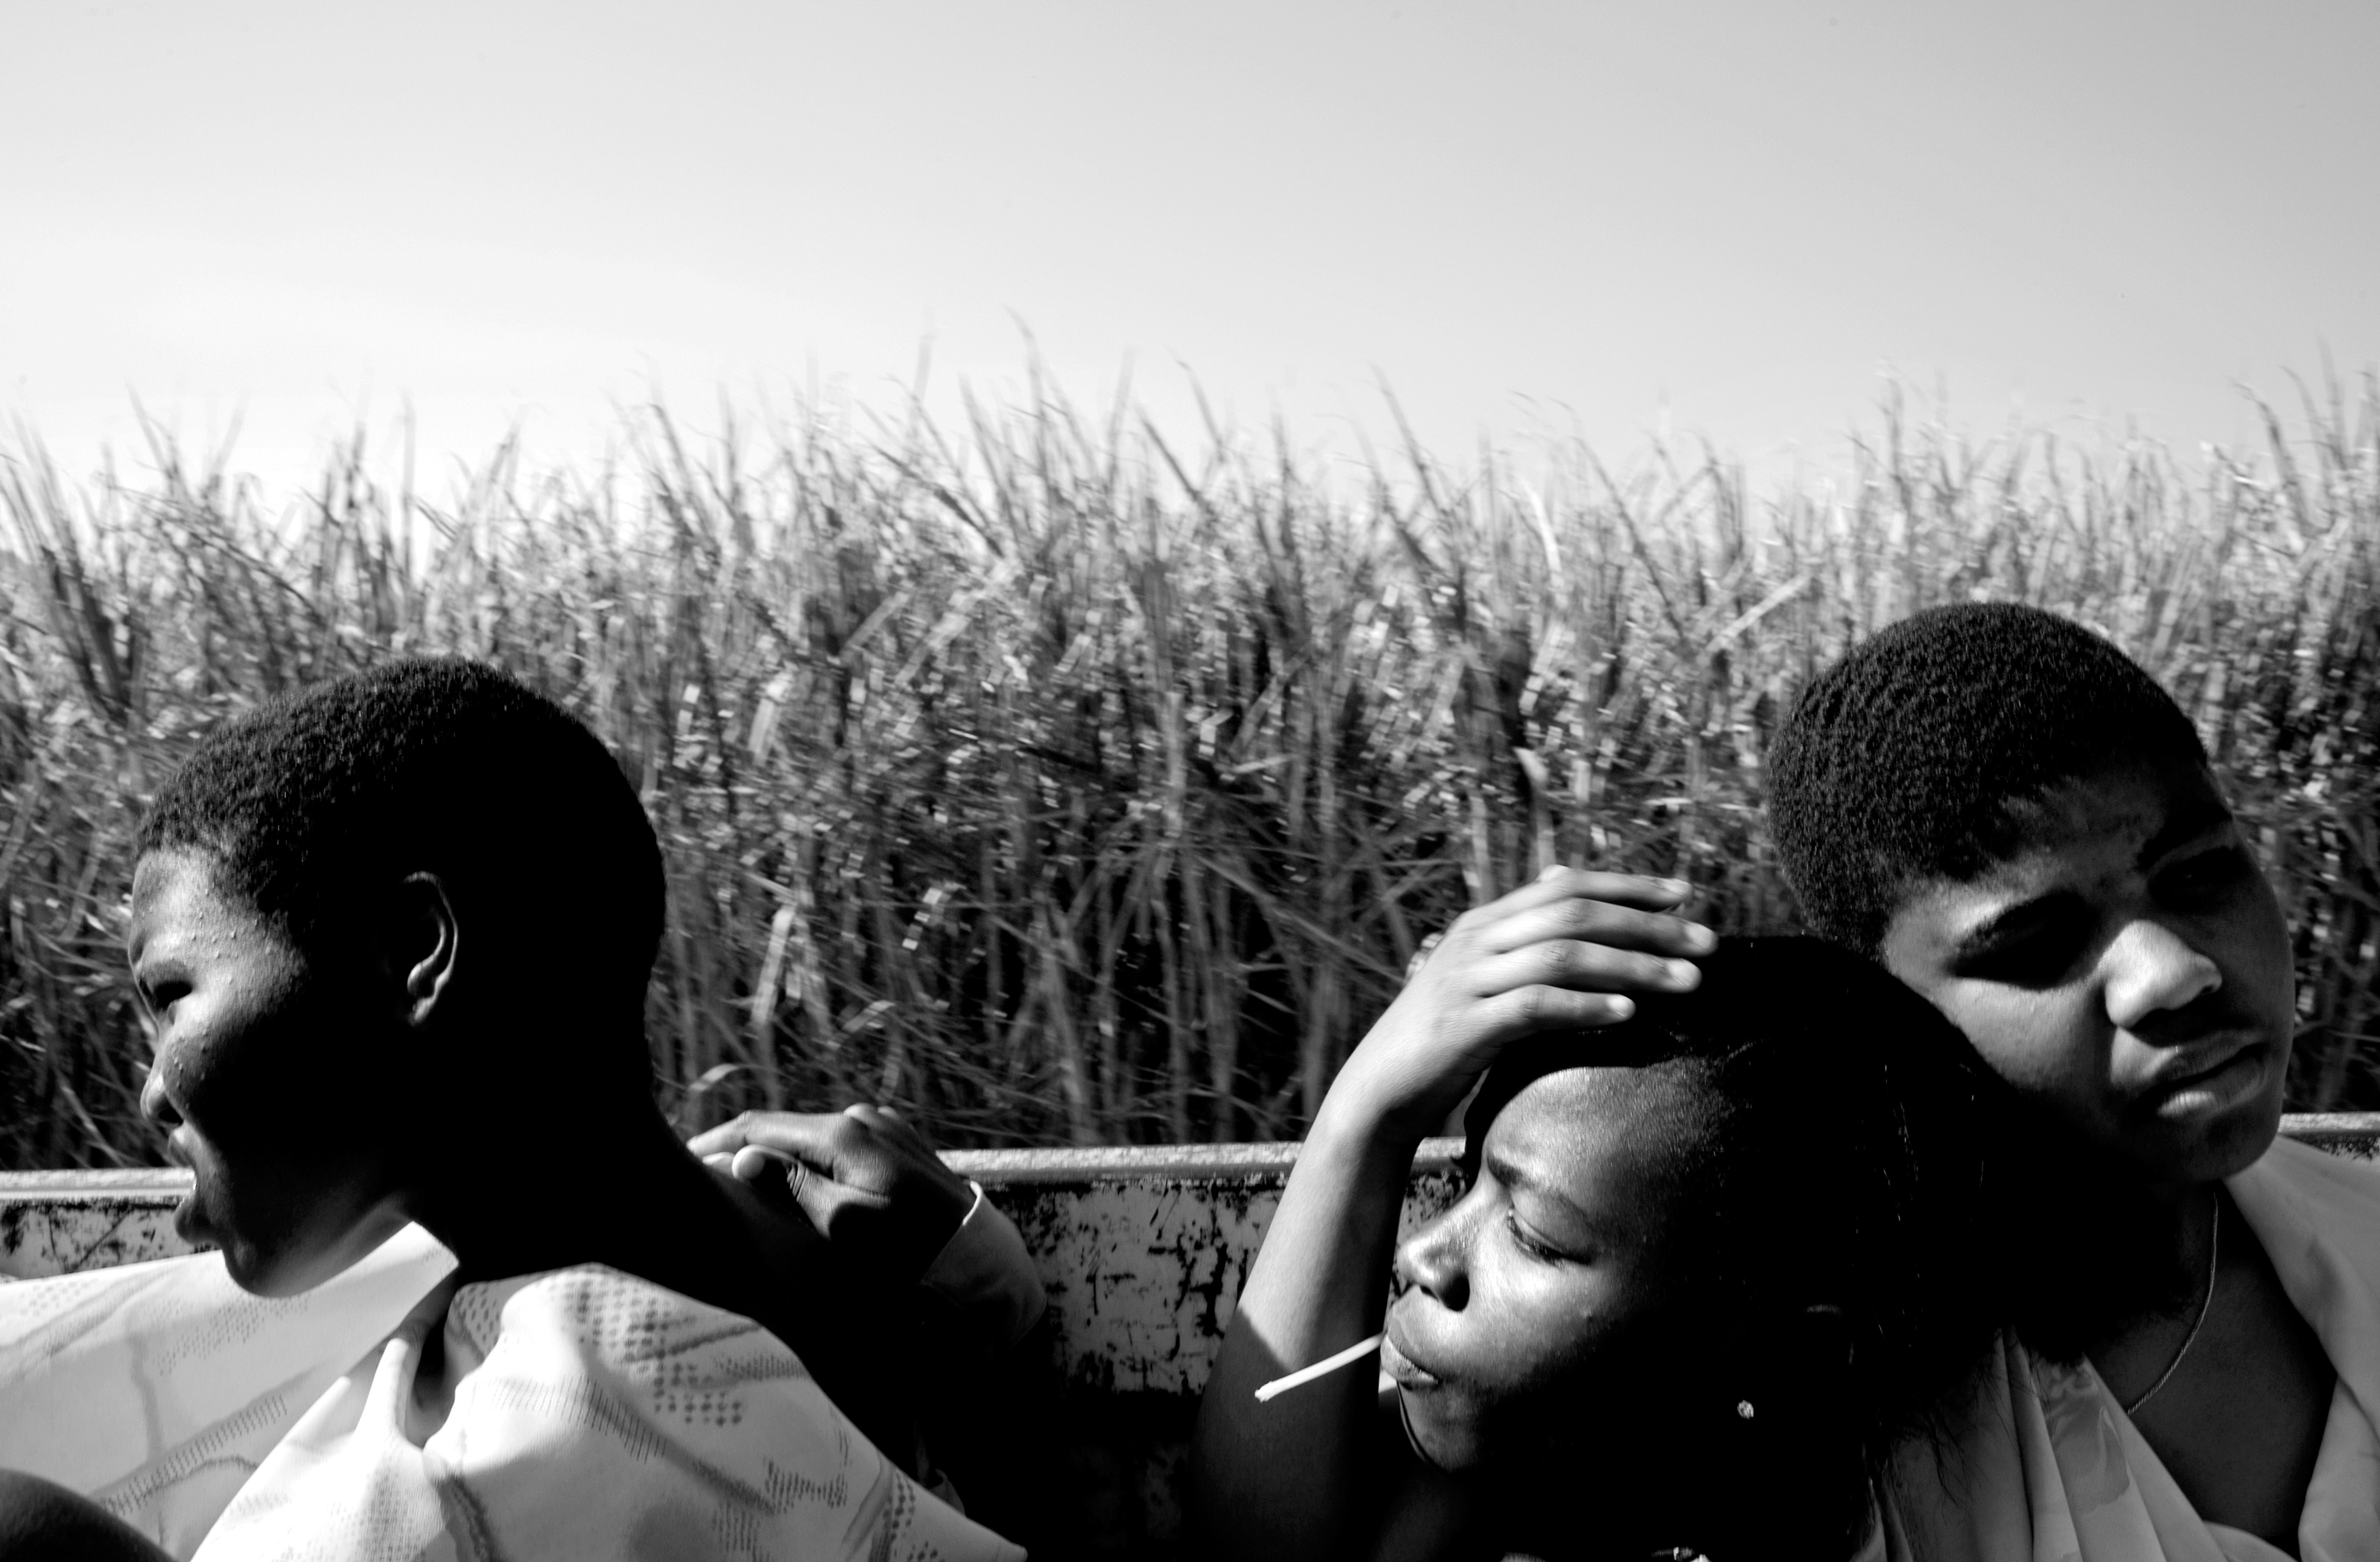 Swazi girls ride in the back of a truck through the sugar cane fields during the annual Umhlanga Dance, a right of passage into womanhood in Swaziland.